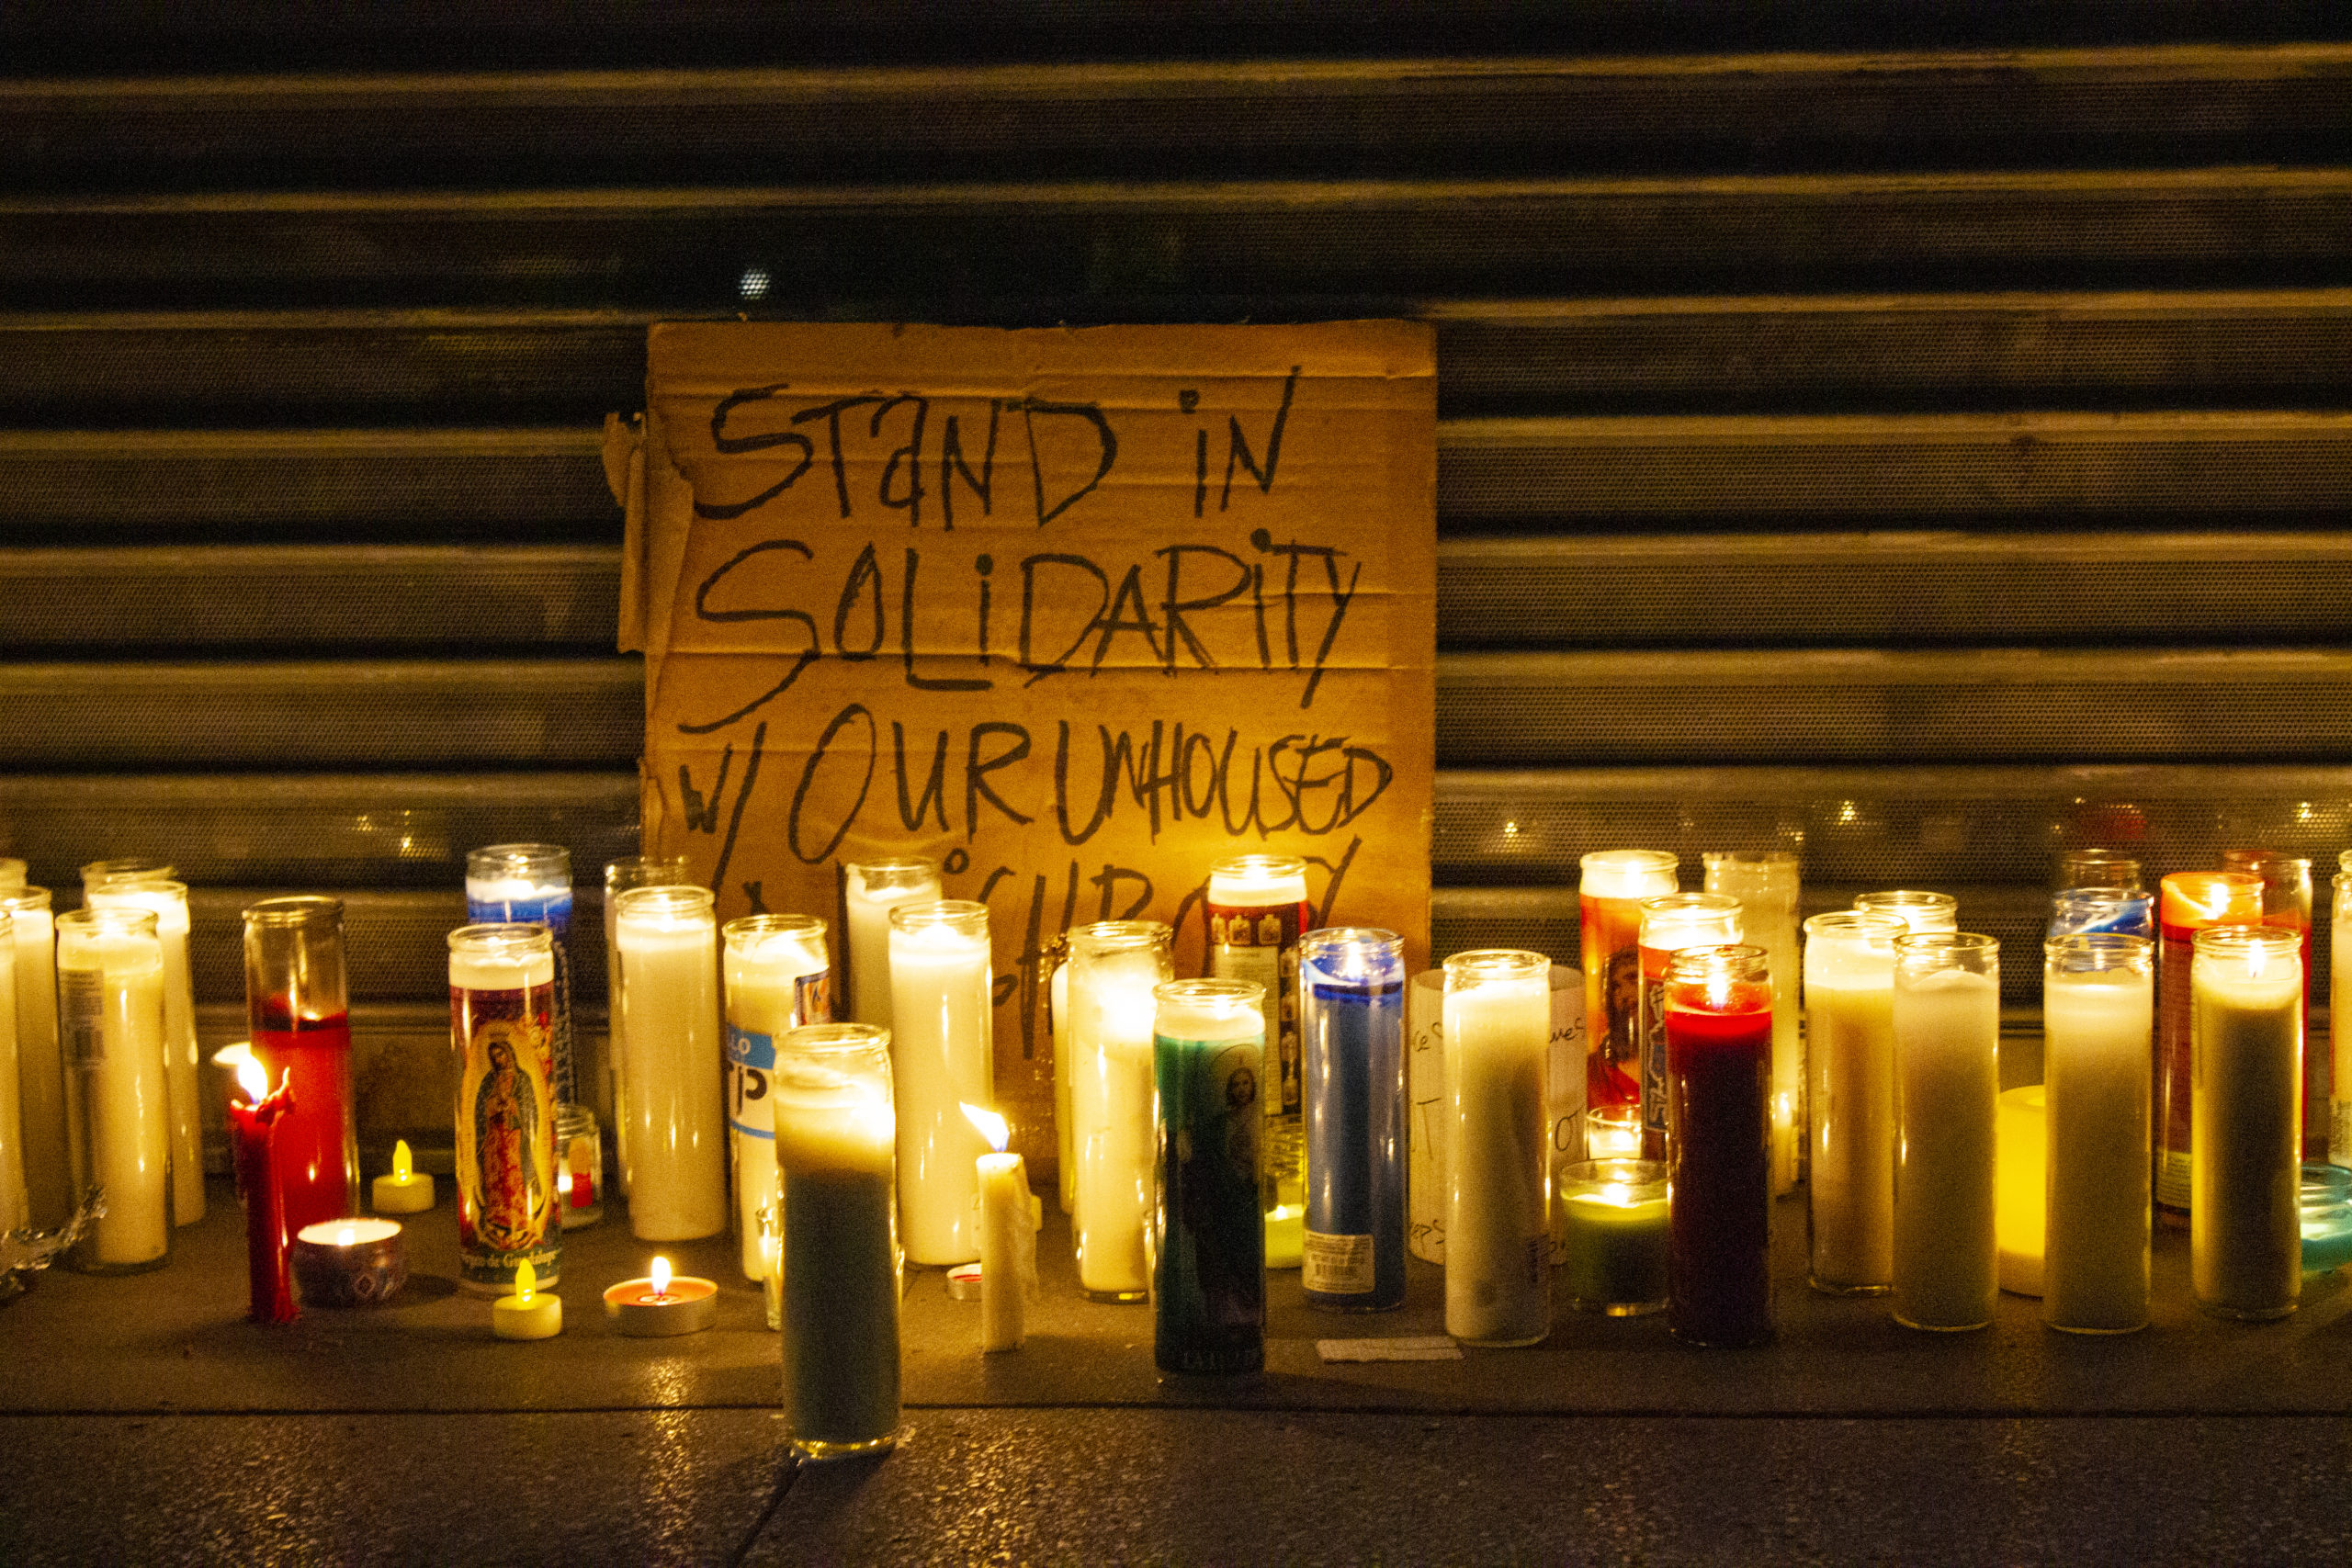 SIGN: Stand in solidarity with your unhoused neighbors, candles.